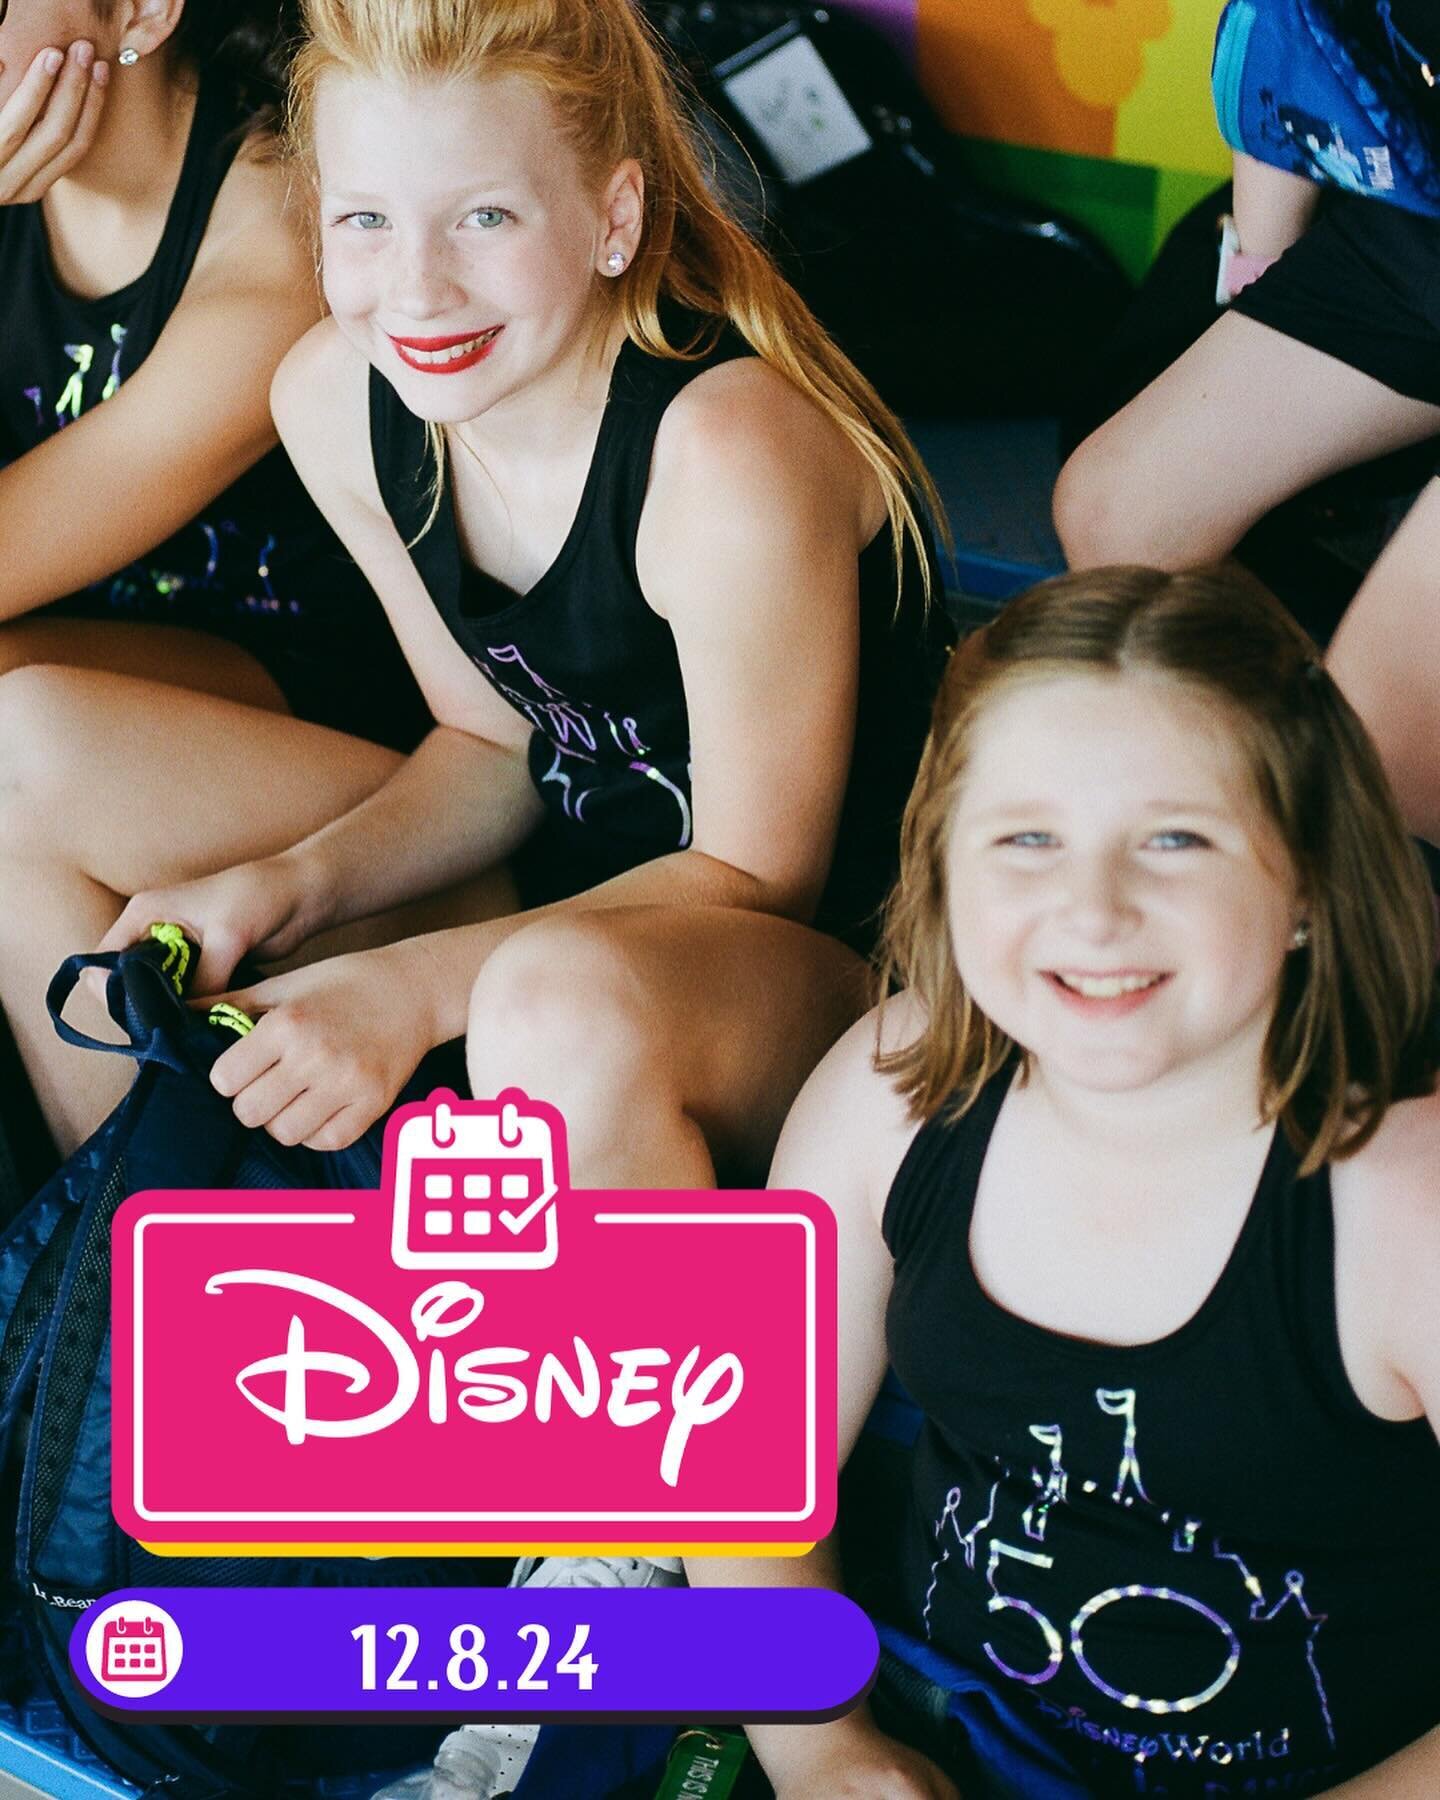 There&rsquo;s a great big beautiful tomorrow!! ✨🐭
The KSID Mouse Club returns to Walt Disney World 12.8.24 for our most magical and wonderful Dancing in Disney Holiday production! Are you a Kelly Irish Dancer? Join the KSID Mouse Club today! 
.
.
.
